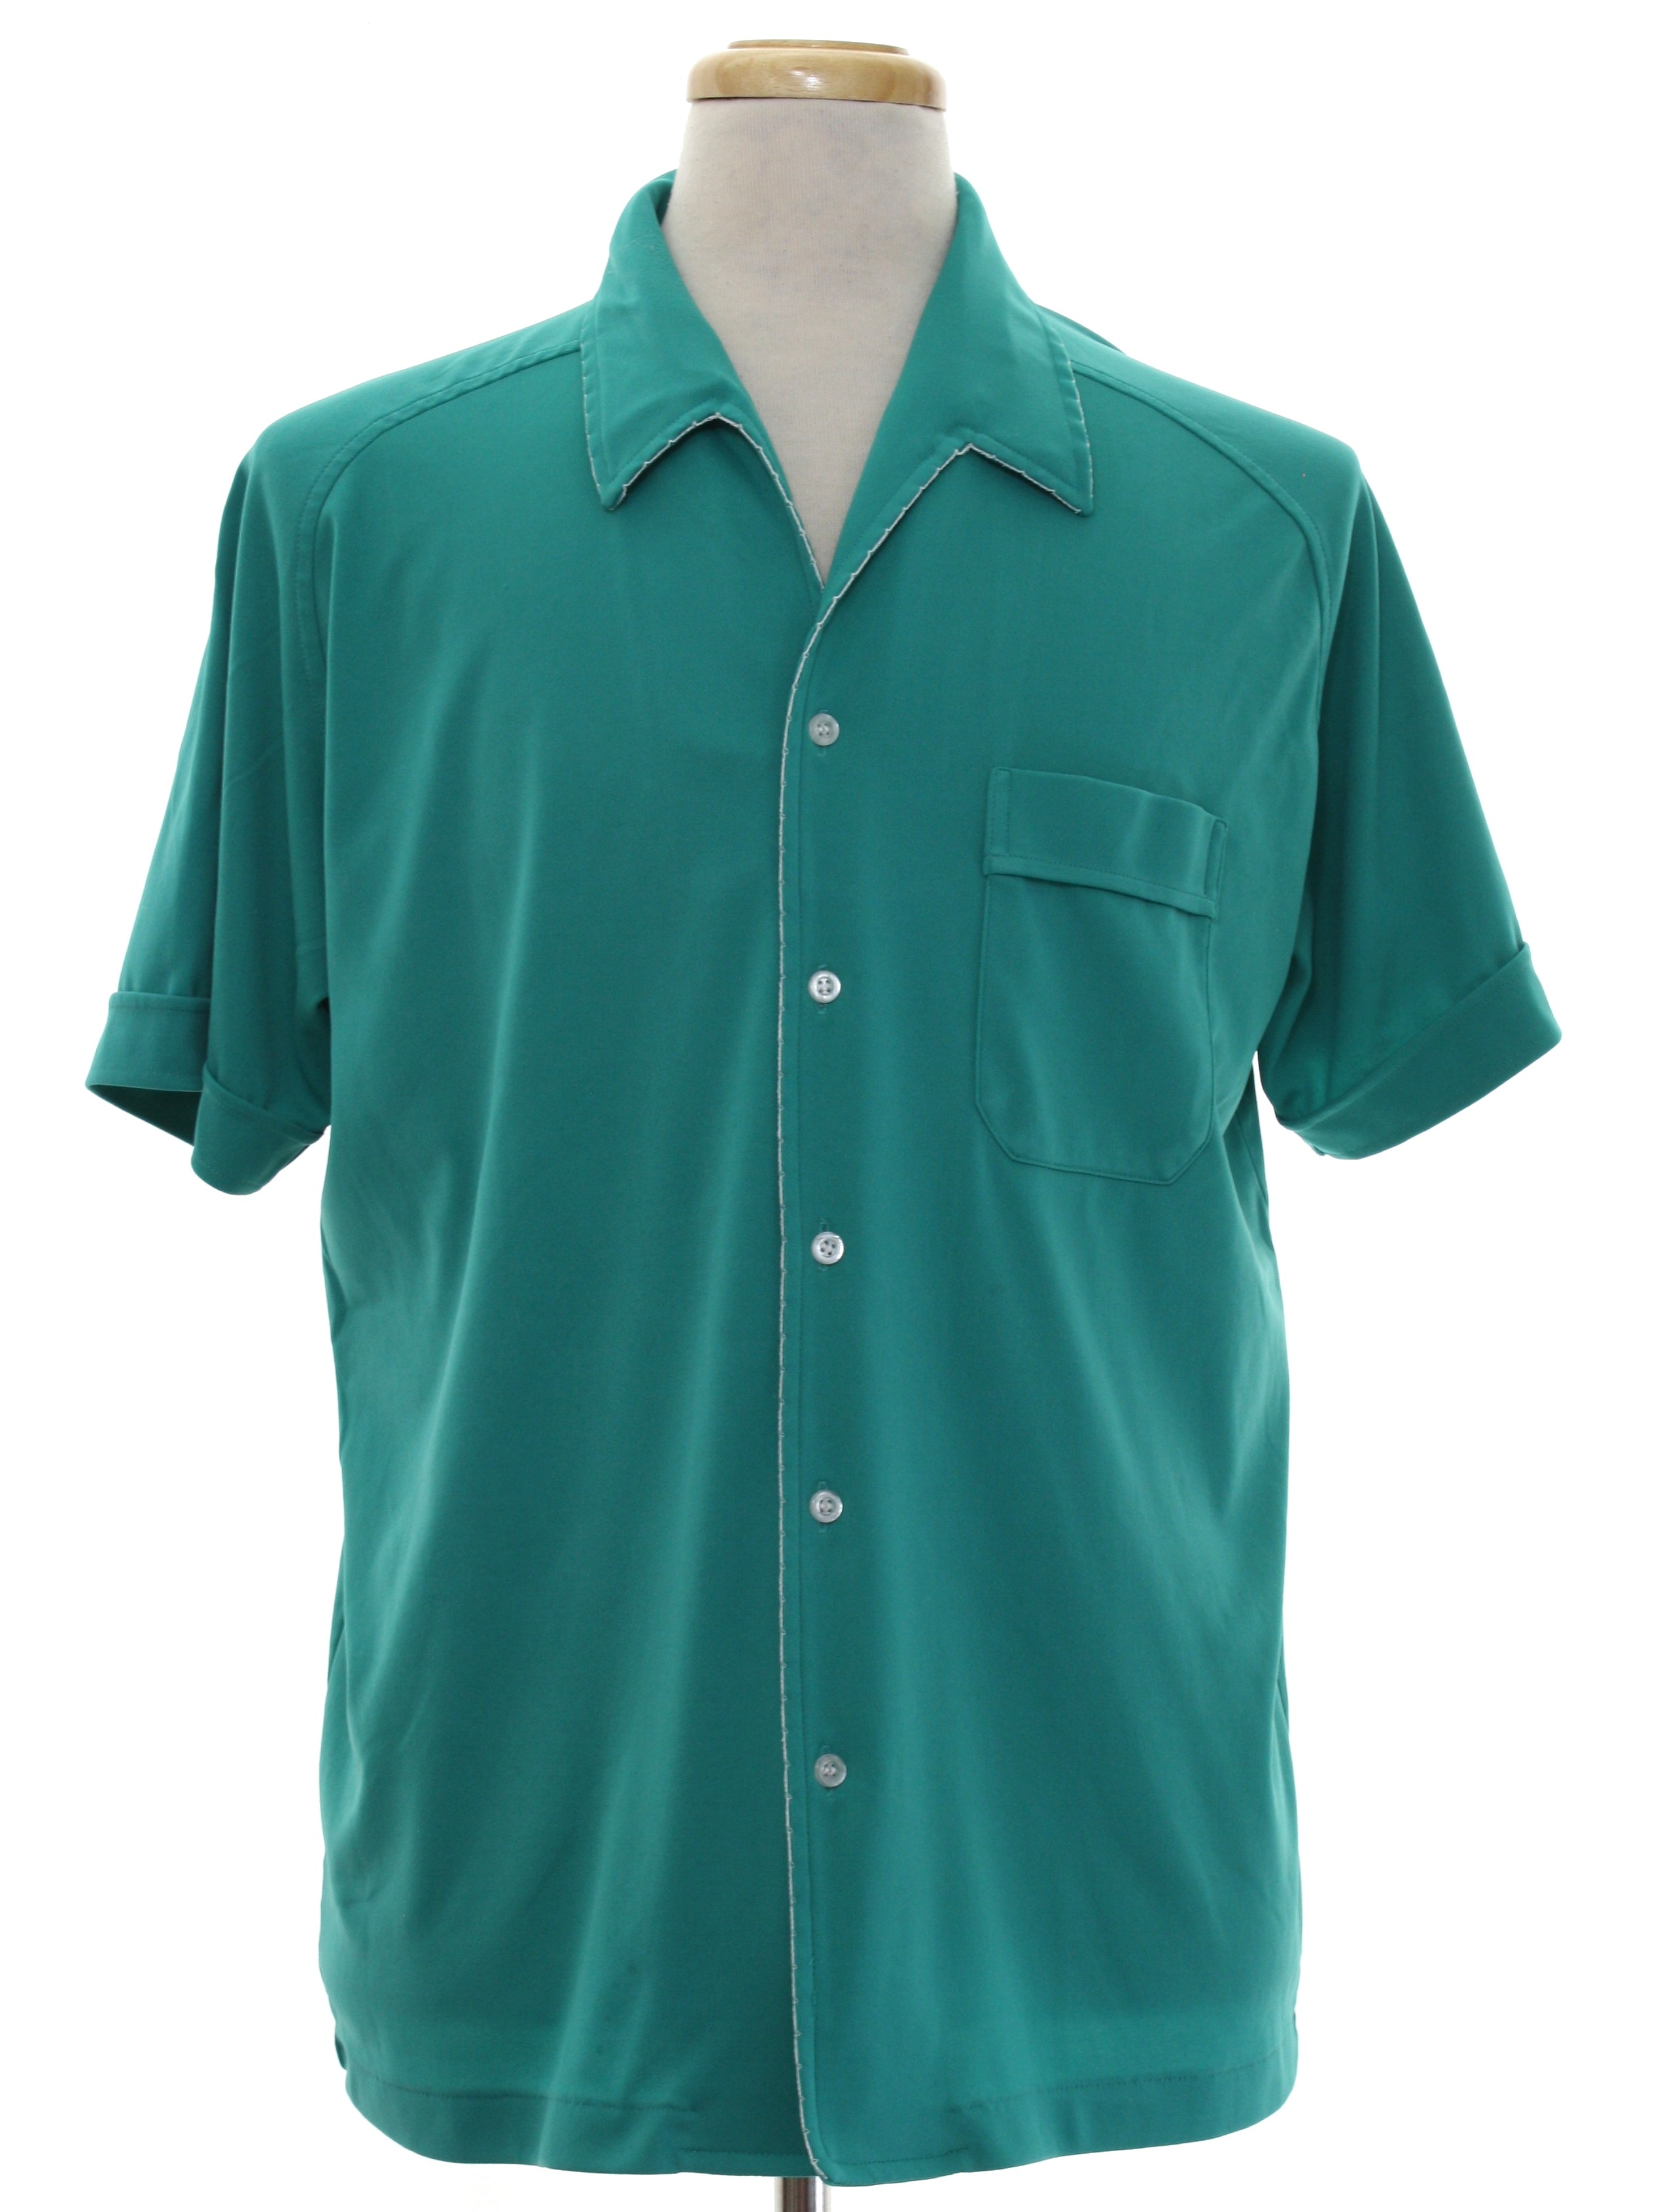 70s Shirt (Idle Time): Late 70s or Early 80s -Idle Time- Mens teal ...